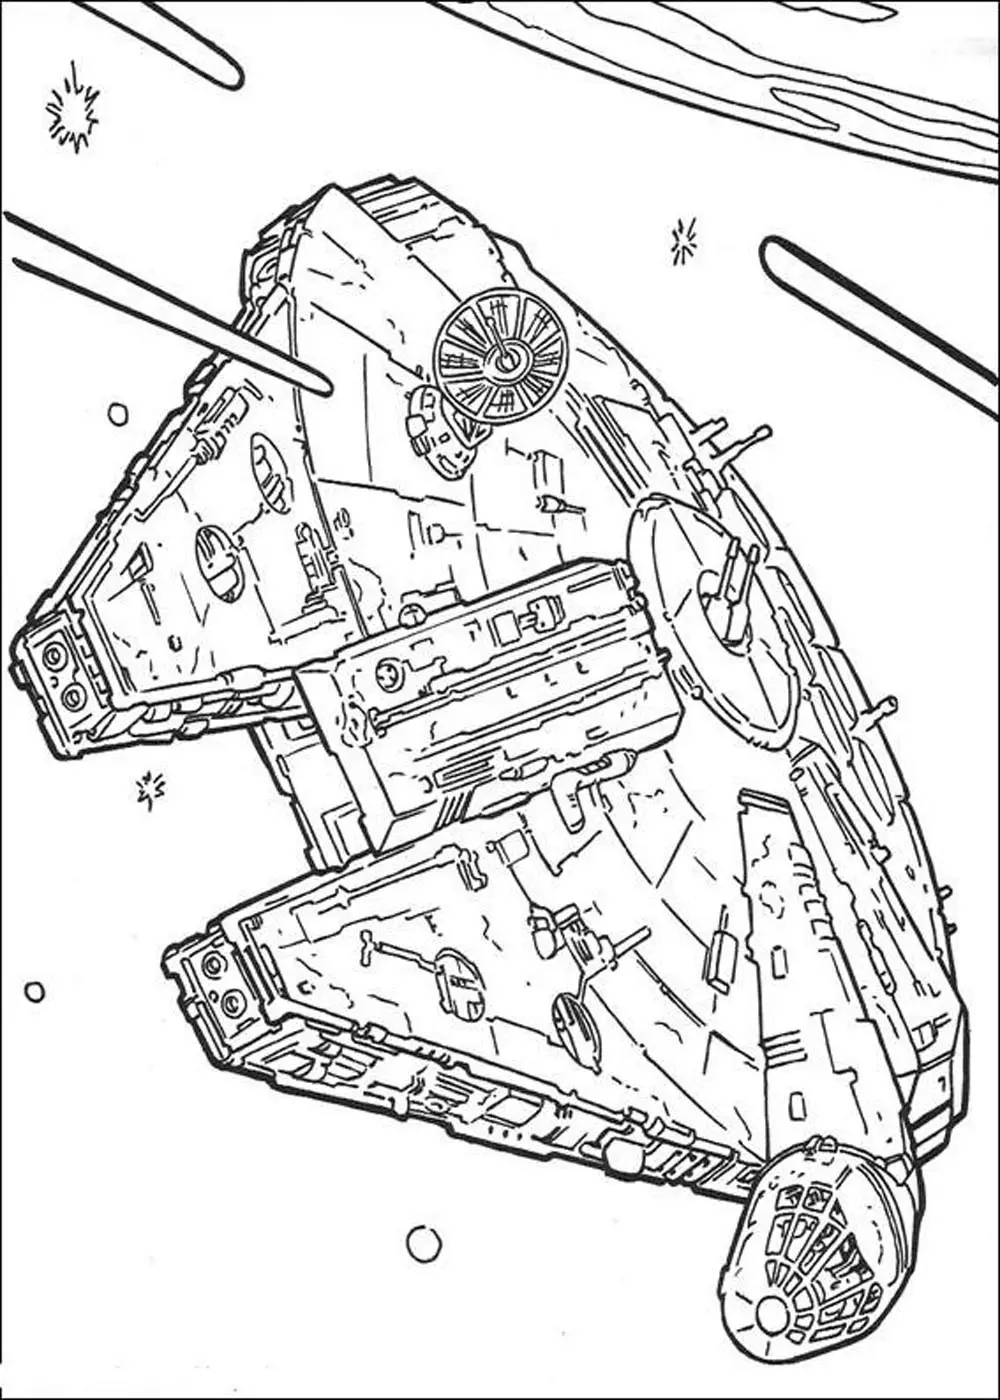 Inesyfederico-Clases: Lego Star Wars Coloring Pages concernant Lego Star Wars À Colorier